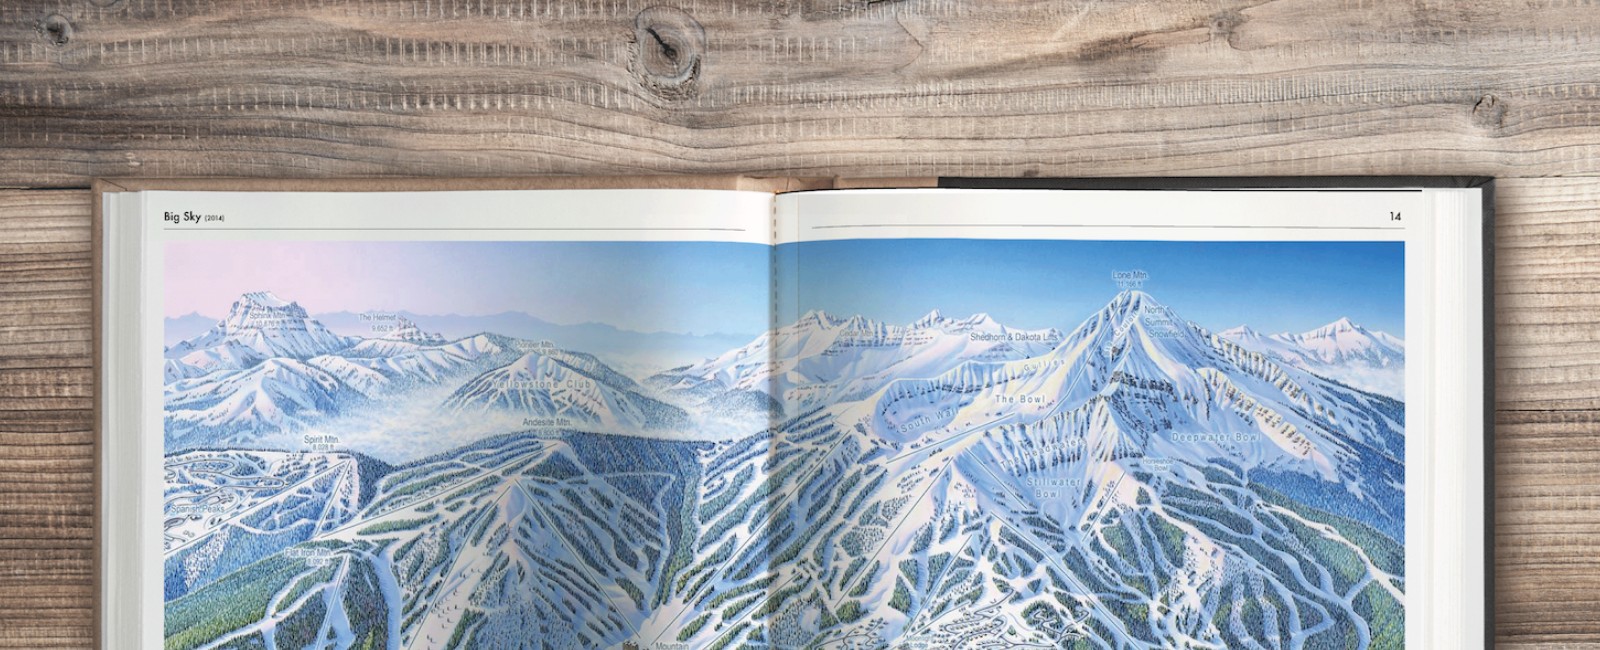 Astonishing Success on Kickstarter Campaign Launched by Iconic Ski Map Painter, James Niehues